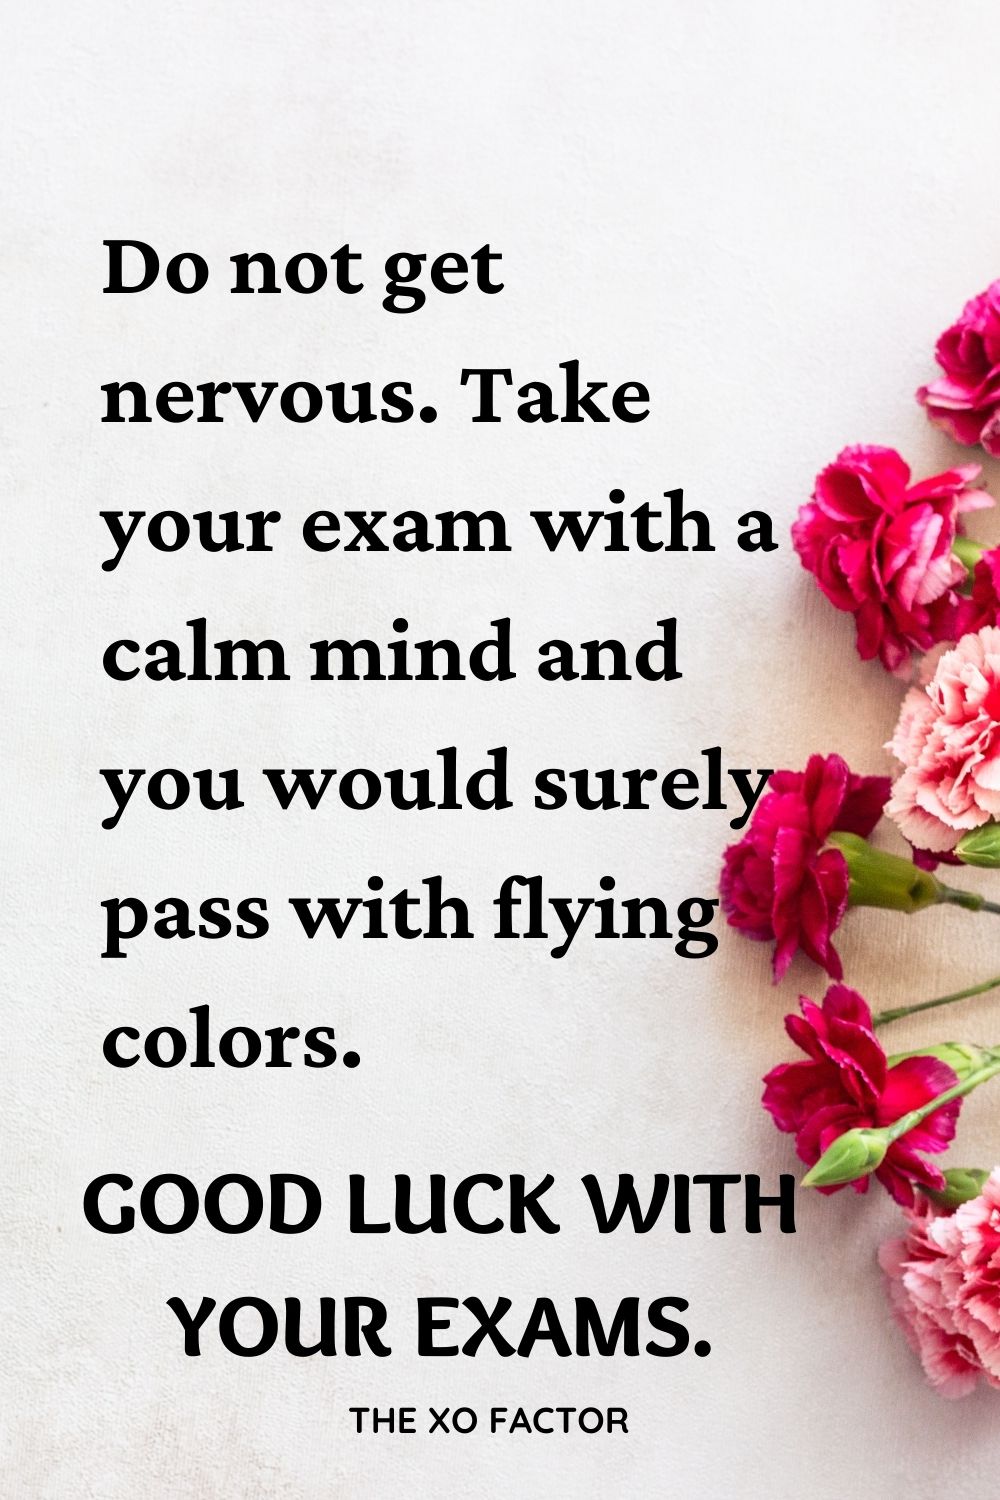 Do not get nervous. Take your exam with a calm mind and you would surely pass with flying colors. Good luck with your exams.